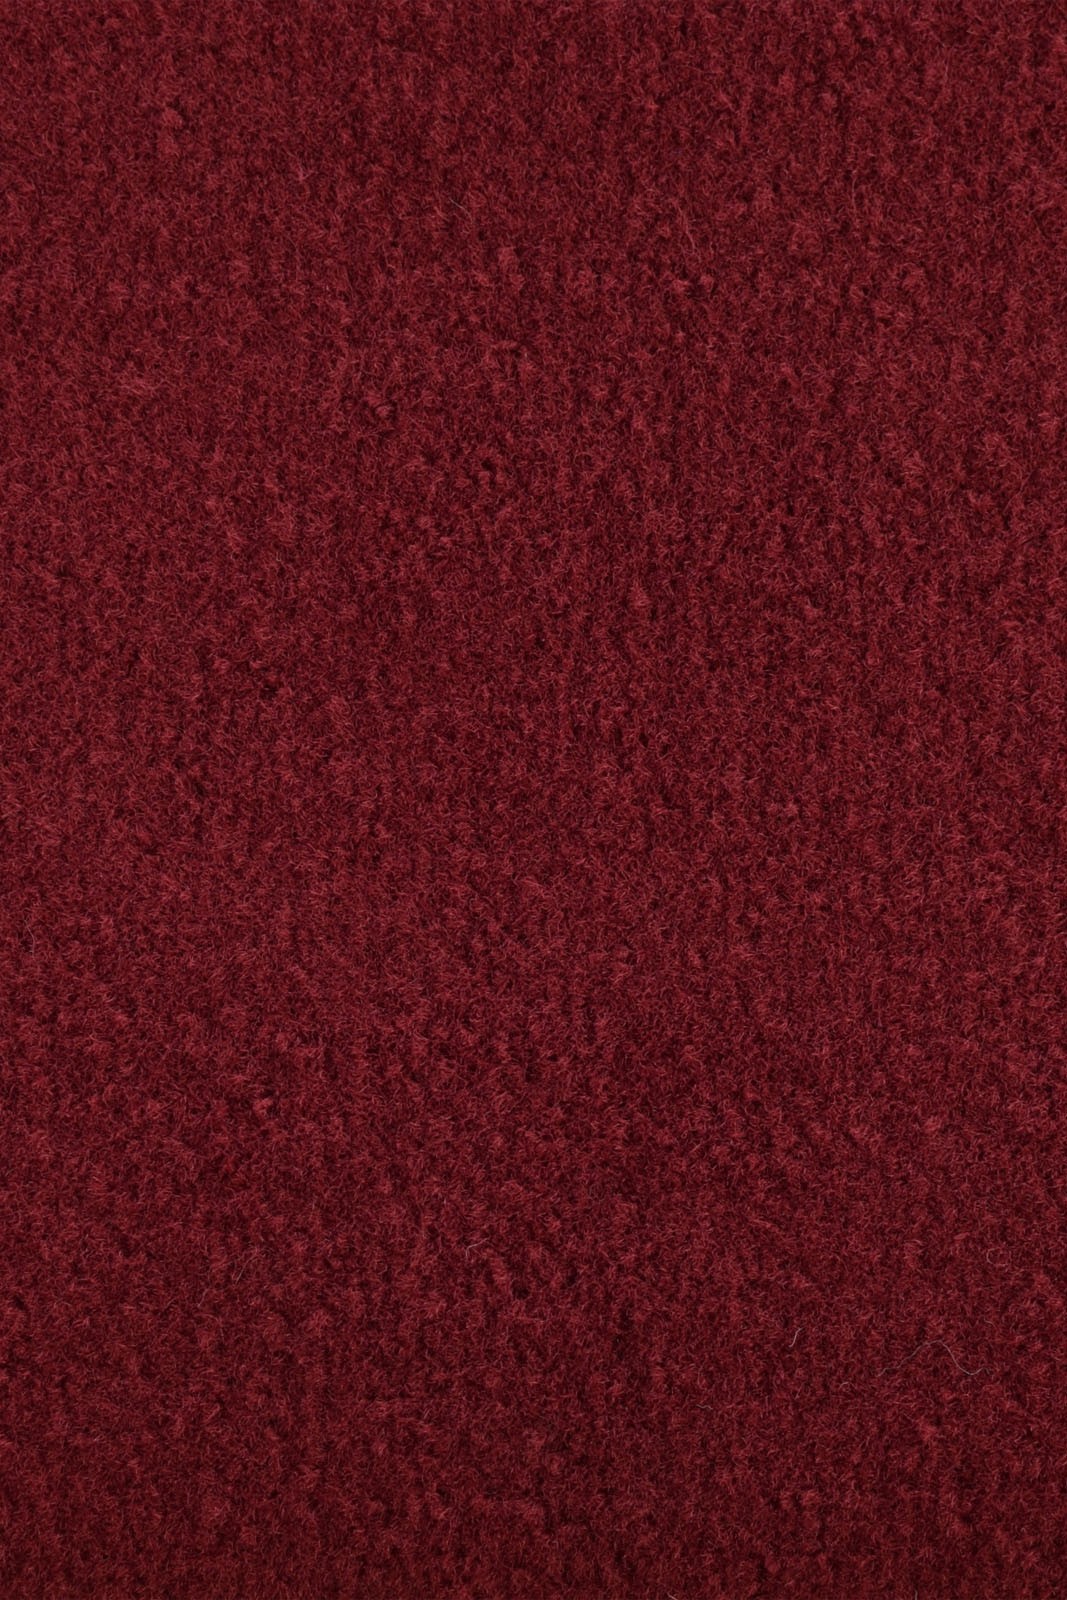 Color world collection kids Favorite indoor outdoor area rugs with Rubber Marine Backing for Patio, Porch, Deck, Boat, Basement or Garage with Premium Bound Polyester Edges Burgundy 2'X3' - image 1 of 1